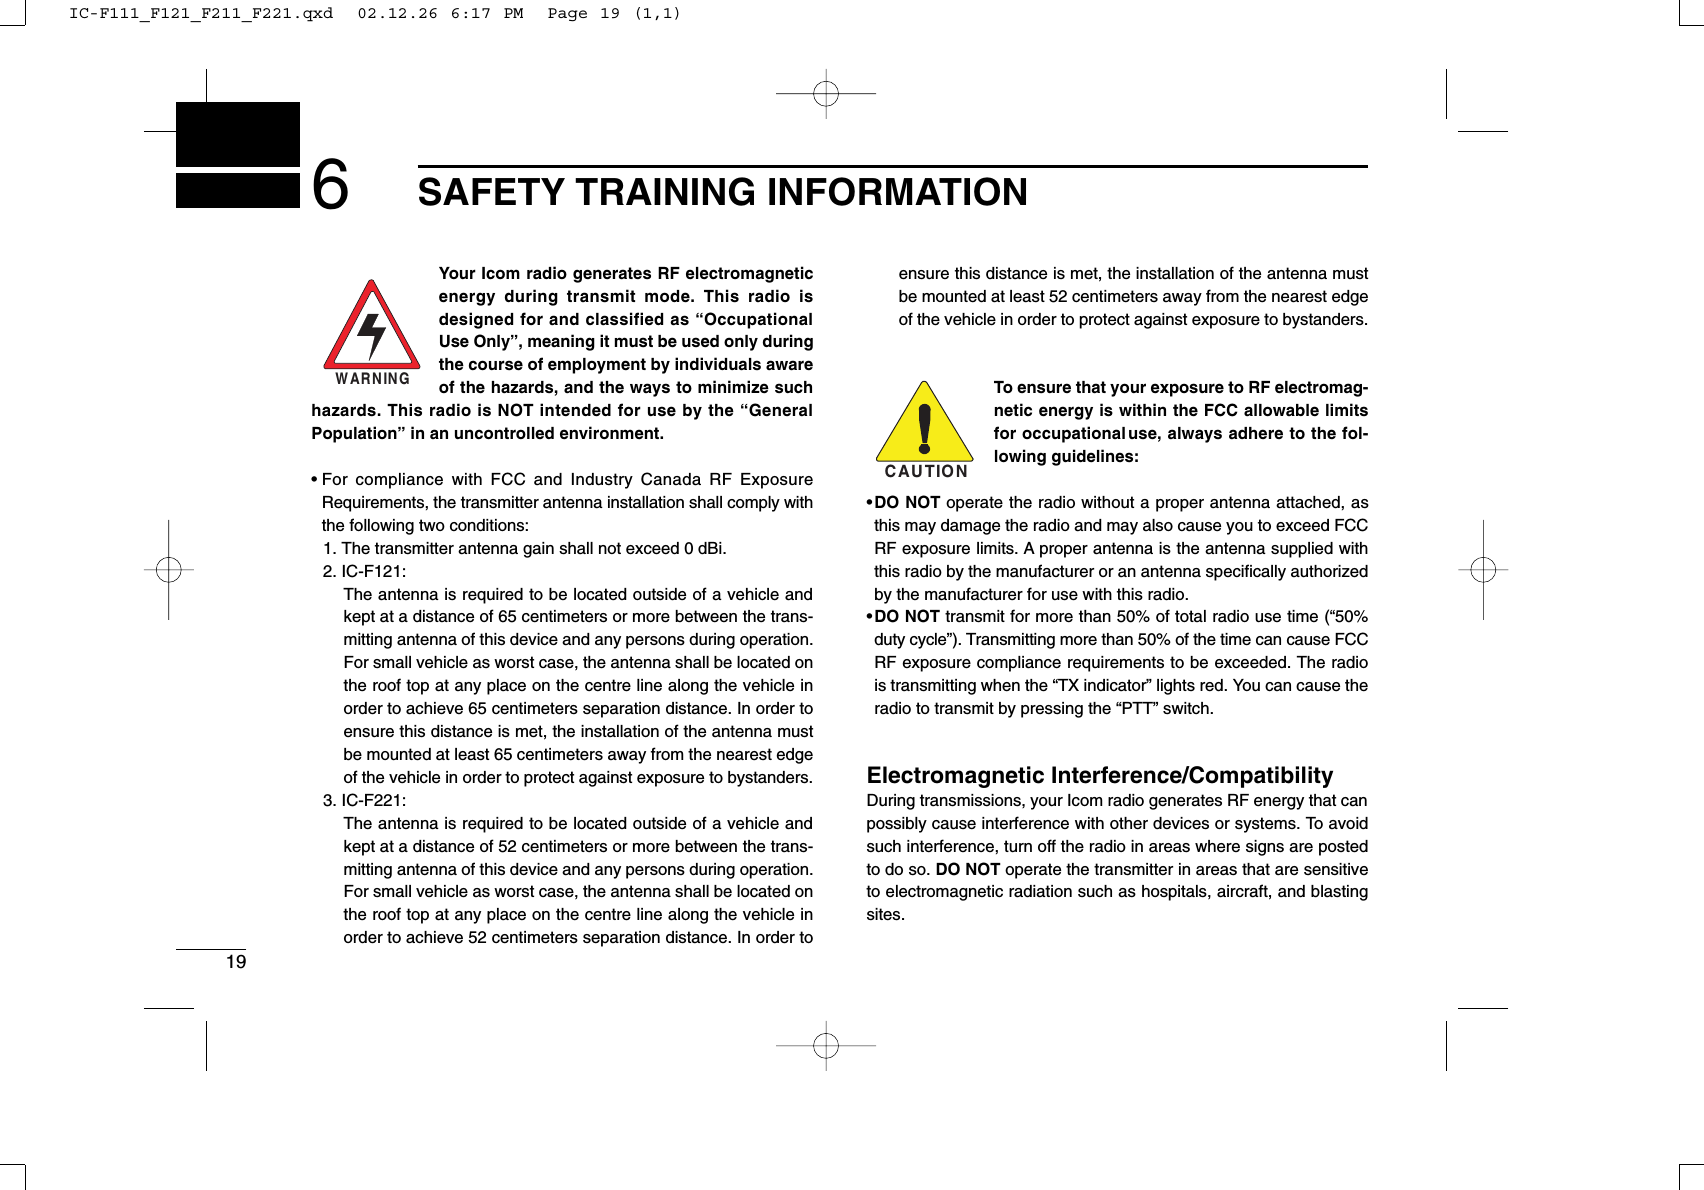 196SAFETY TRAINING INFORMATIONYour Icom radio generates RF electromagneticenergy during transmit mode. This radio isdesigned for and classified as “OccupationalUse Only”, meaning it must be used only duringthe course of employment by individuals awareof the hazards, and the ways to minimize suchhazards. This radio is NOT intended for use by the “GeneralPopulation” in an uncontrolled environment.• For compliance with FCC and Industry Canada RF ExposureRequirements, the transmitter antenna installation shall comply withthe following two conditions:1. The transmitter antenna gain shall not exceed 0 dBi.2. IC-F121:The antenna is required to be located outside of a vehicle andkept at a distance of 65 centimeters or more between the trans-mitting antenna of this device and any persons during operation.For small vehicle as worst case, the antenna shall be located onthe roof top at any place on the centre line along the vehicle inorder to achieve 65 centimeters separation distance. In order toensure this distance is met, the installation of the antenna mustbe mounted at least 65 centimeters away from the nearest edgeof the vehicle in order to protect against exposure to bystanders.3. IC-F221:The antenna is required to be located outside of a vehicle andkept at a distance of 52 centimeters or more between the trans-mitting antenna of this device and any persons during operation.For small vehicle as worst case, the antenna shall be located onthe roof top at any place on the centre line along the vehicle inorder to achieve 52 centimeters separation distance. In order toensure this distance is met, the installation of the antenna mustbe mounted at least 52 centimeters away from the nearest edgeof the vehicle in order to protect against exposure to bystanders.To ensure that your exposure to RF electromag-netic energy is within the FCC allowable limitsfor occupational use, always adhere to the fol-lowing guidelines:•DO NOT operate the radio without a proper antenna attached, asthis may damage the radio and may also cause you to exceed FCCRF exposure limits. A proper antenna is the antenna supplied withthis radio by the manufacturer or an antenna speciﬁcally authorizedby the manufacturer for use with this radio.•DO NOT transmit for more than 50% of total radio use time (“50%duty cycle”). Transmitting more than 50% of the time can cause FCCRF exposure compliance requirements to be exceeded. The radiois transmitting when the “TX indicator” lights red. You can cause theradio to transmit by pressing the “PTT” switch.Electromagnetic Interference/CompatibilityDuring transmissions, your Icom radio generates RF energy that canpossibly cause interference with other devices or systems. To avoidsuch interference, turn off the radio in areas where signs are postedto do so. DO NOT operate the transmitter in areas that are sensitiveto electromagnetic radiation such as hospitals, aircraft, and blastingsites.WARNINGCAUTIONIC-F111_F121_F211_F221.qxd  02.12.26 6:17 PM  Page 19 (1,1)